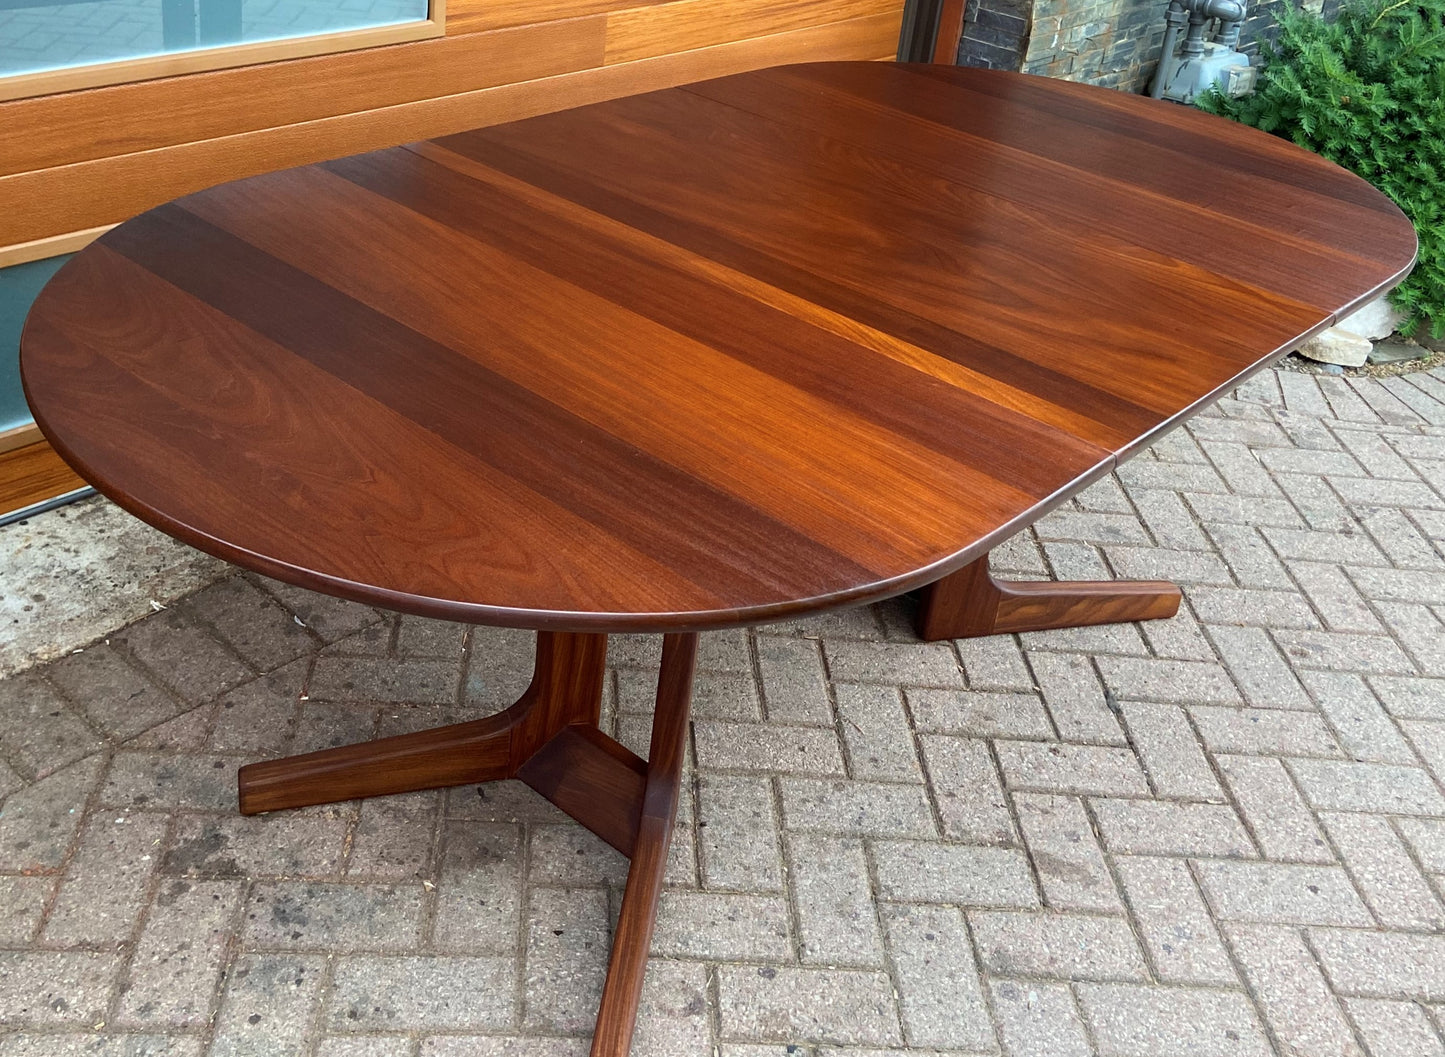 REFINISHED Mid Century Modern SOLID Teak Table by J.Kuypers 58"-80", PERFECT